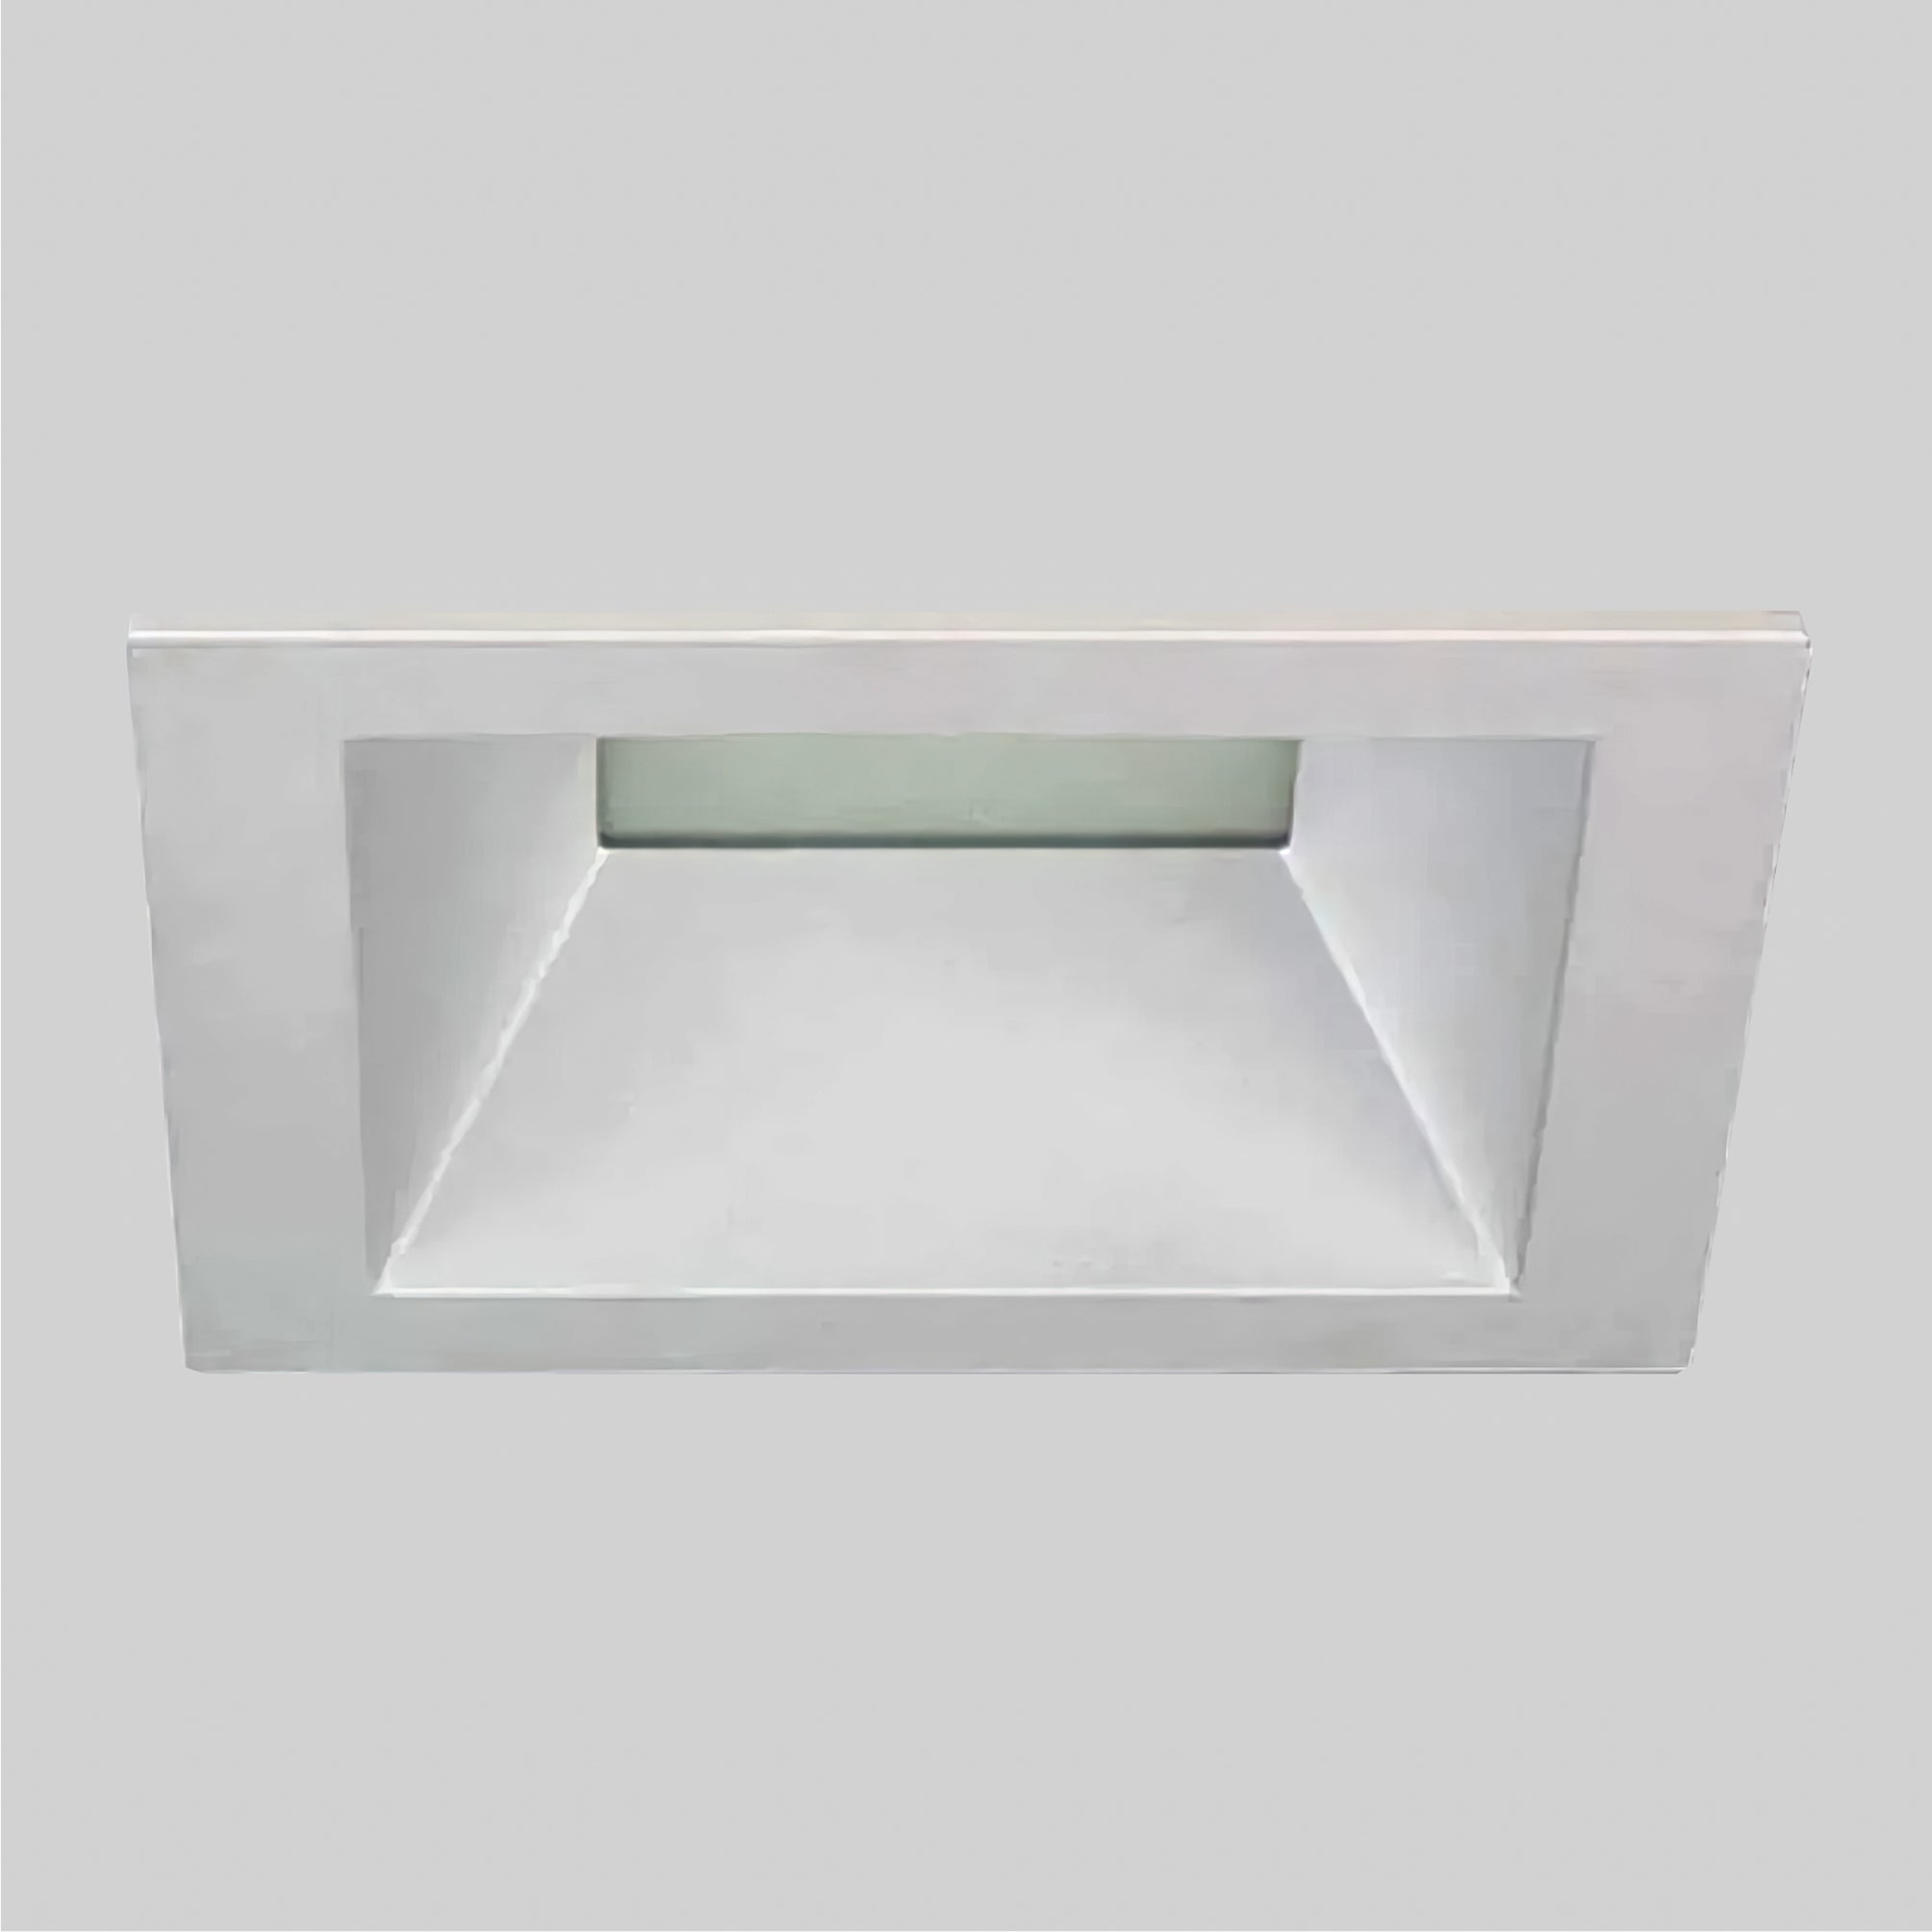 3-Inch Square Architectural LED Downlight Lensed Recessed Light